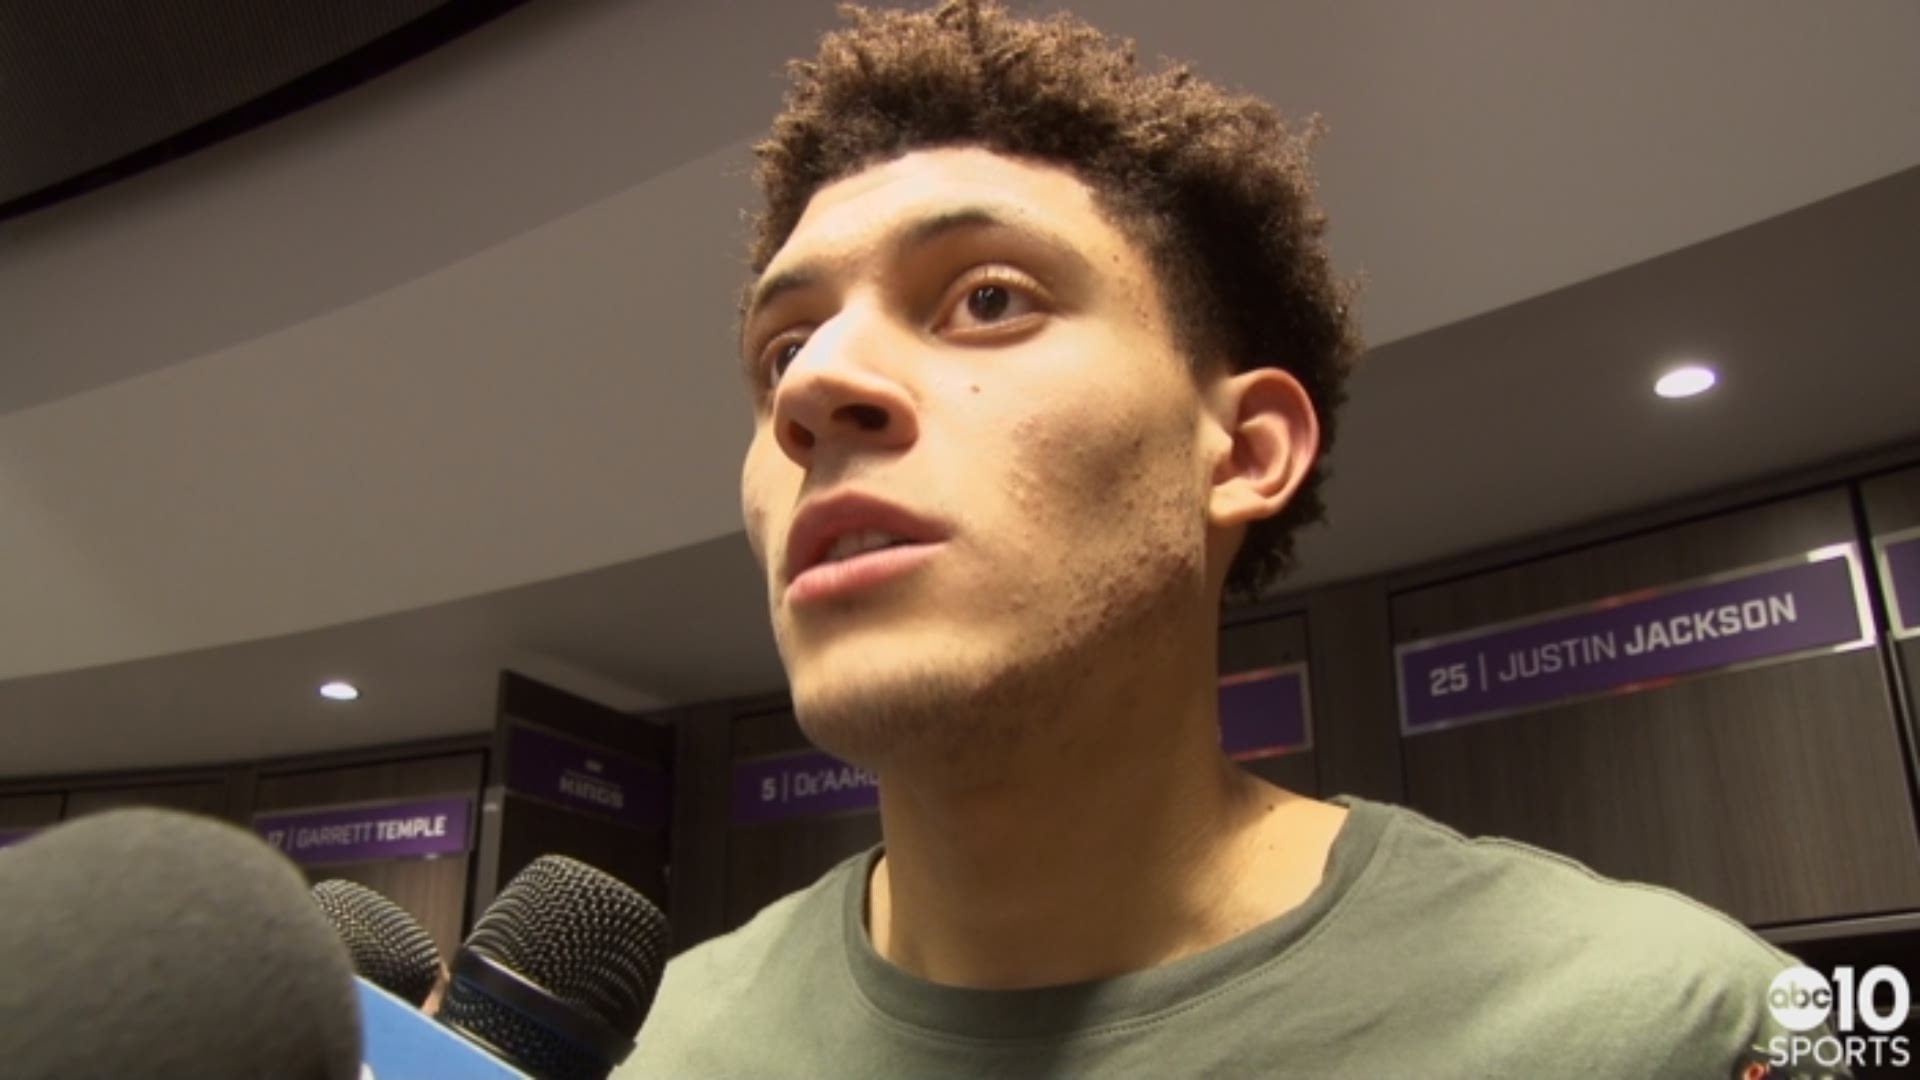 Kings forward Justin Jackson talks about his career-best 16-point performance in Tuesday's win in Sacramento over the Oklahoma City Thunder to snap a seven-game losing streak.